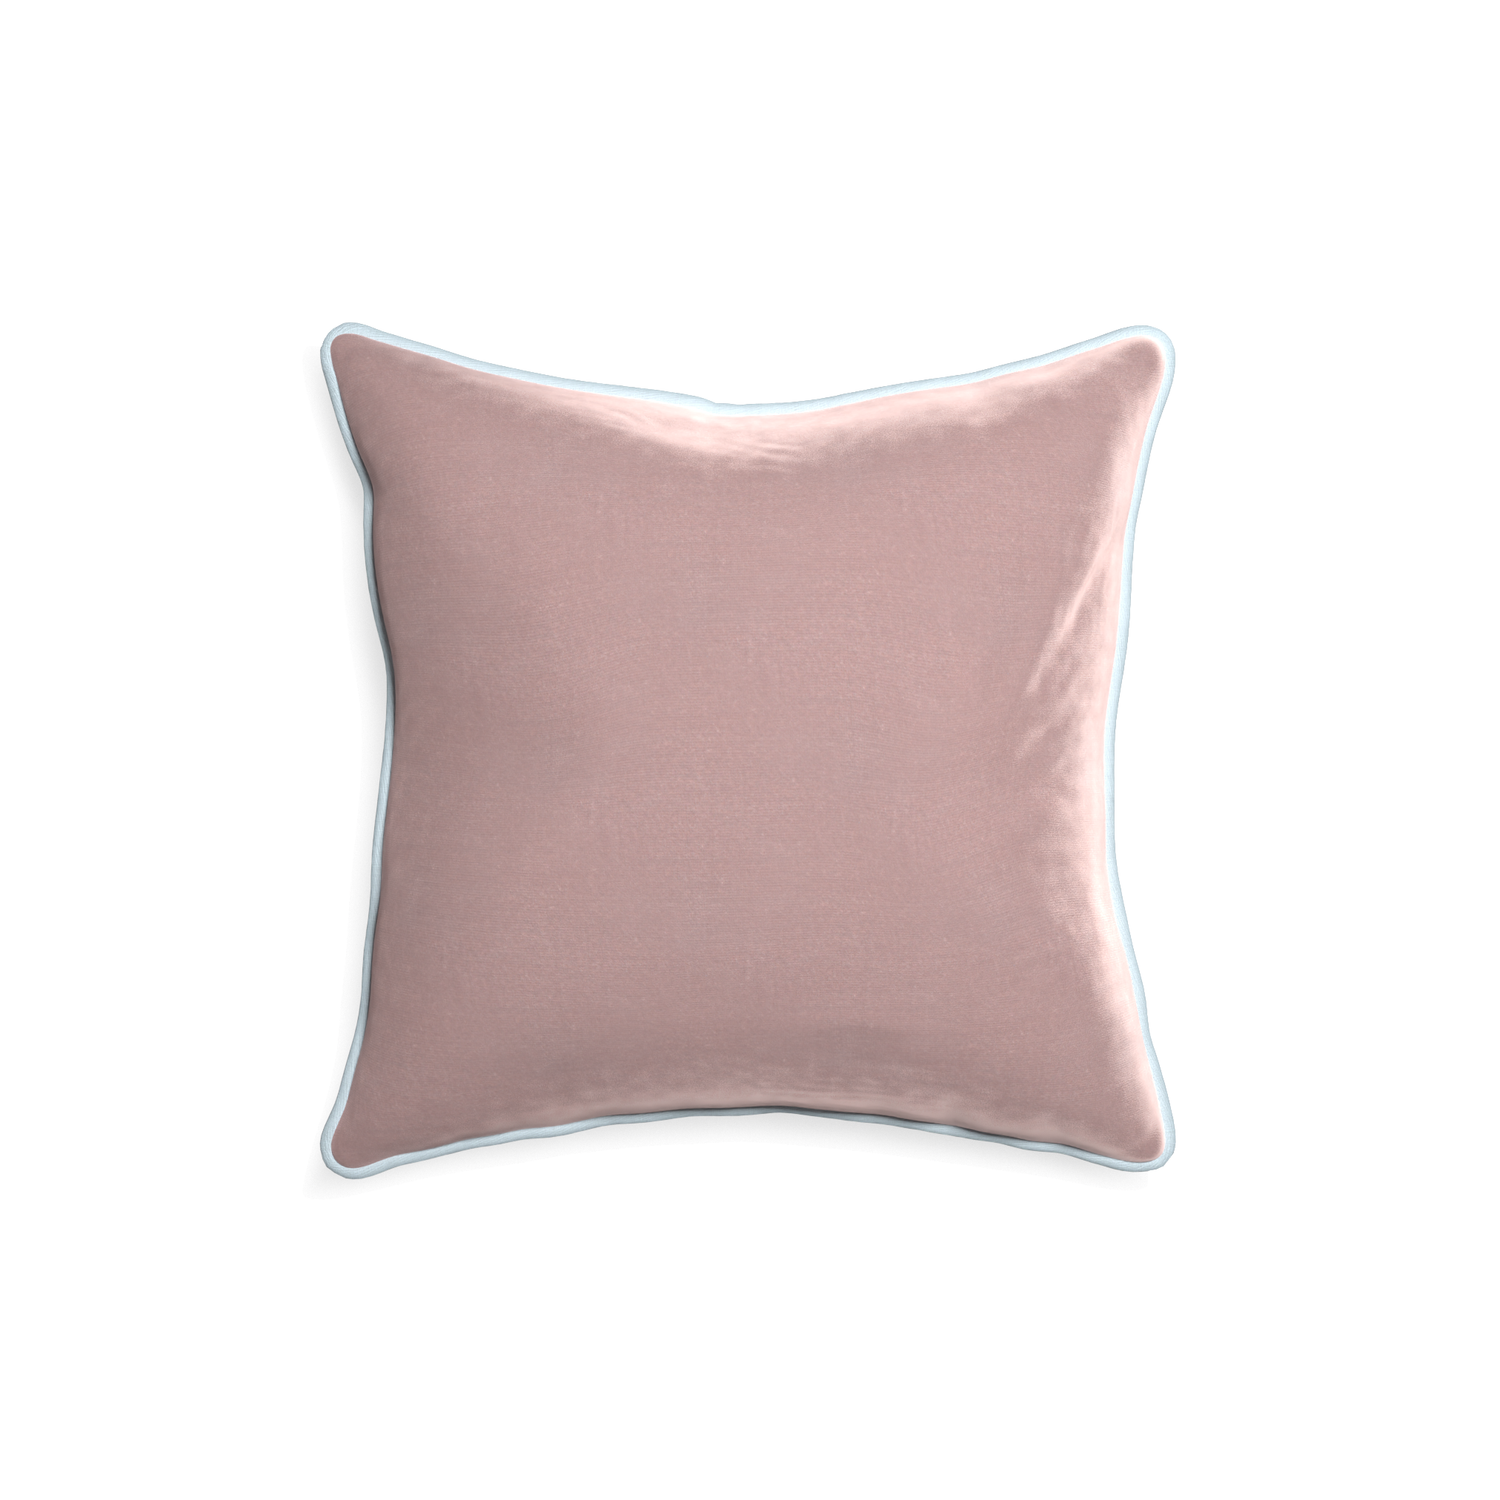 square mauve velvet pillow with light blue piping